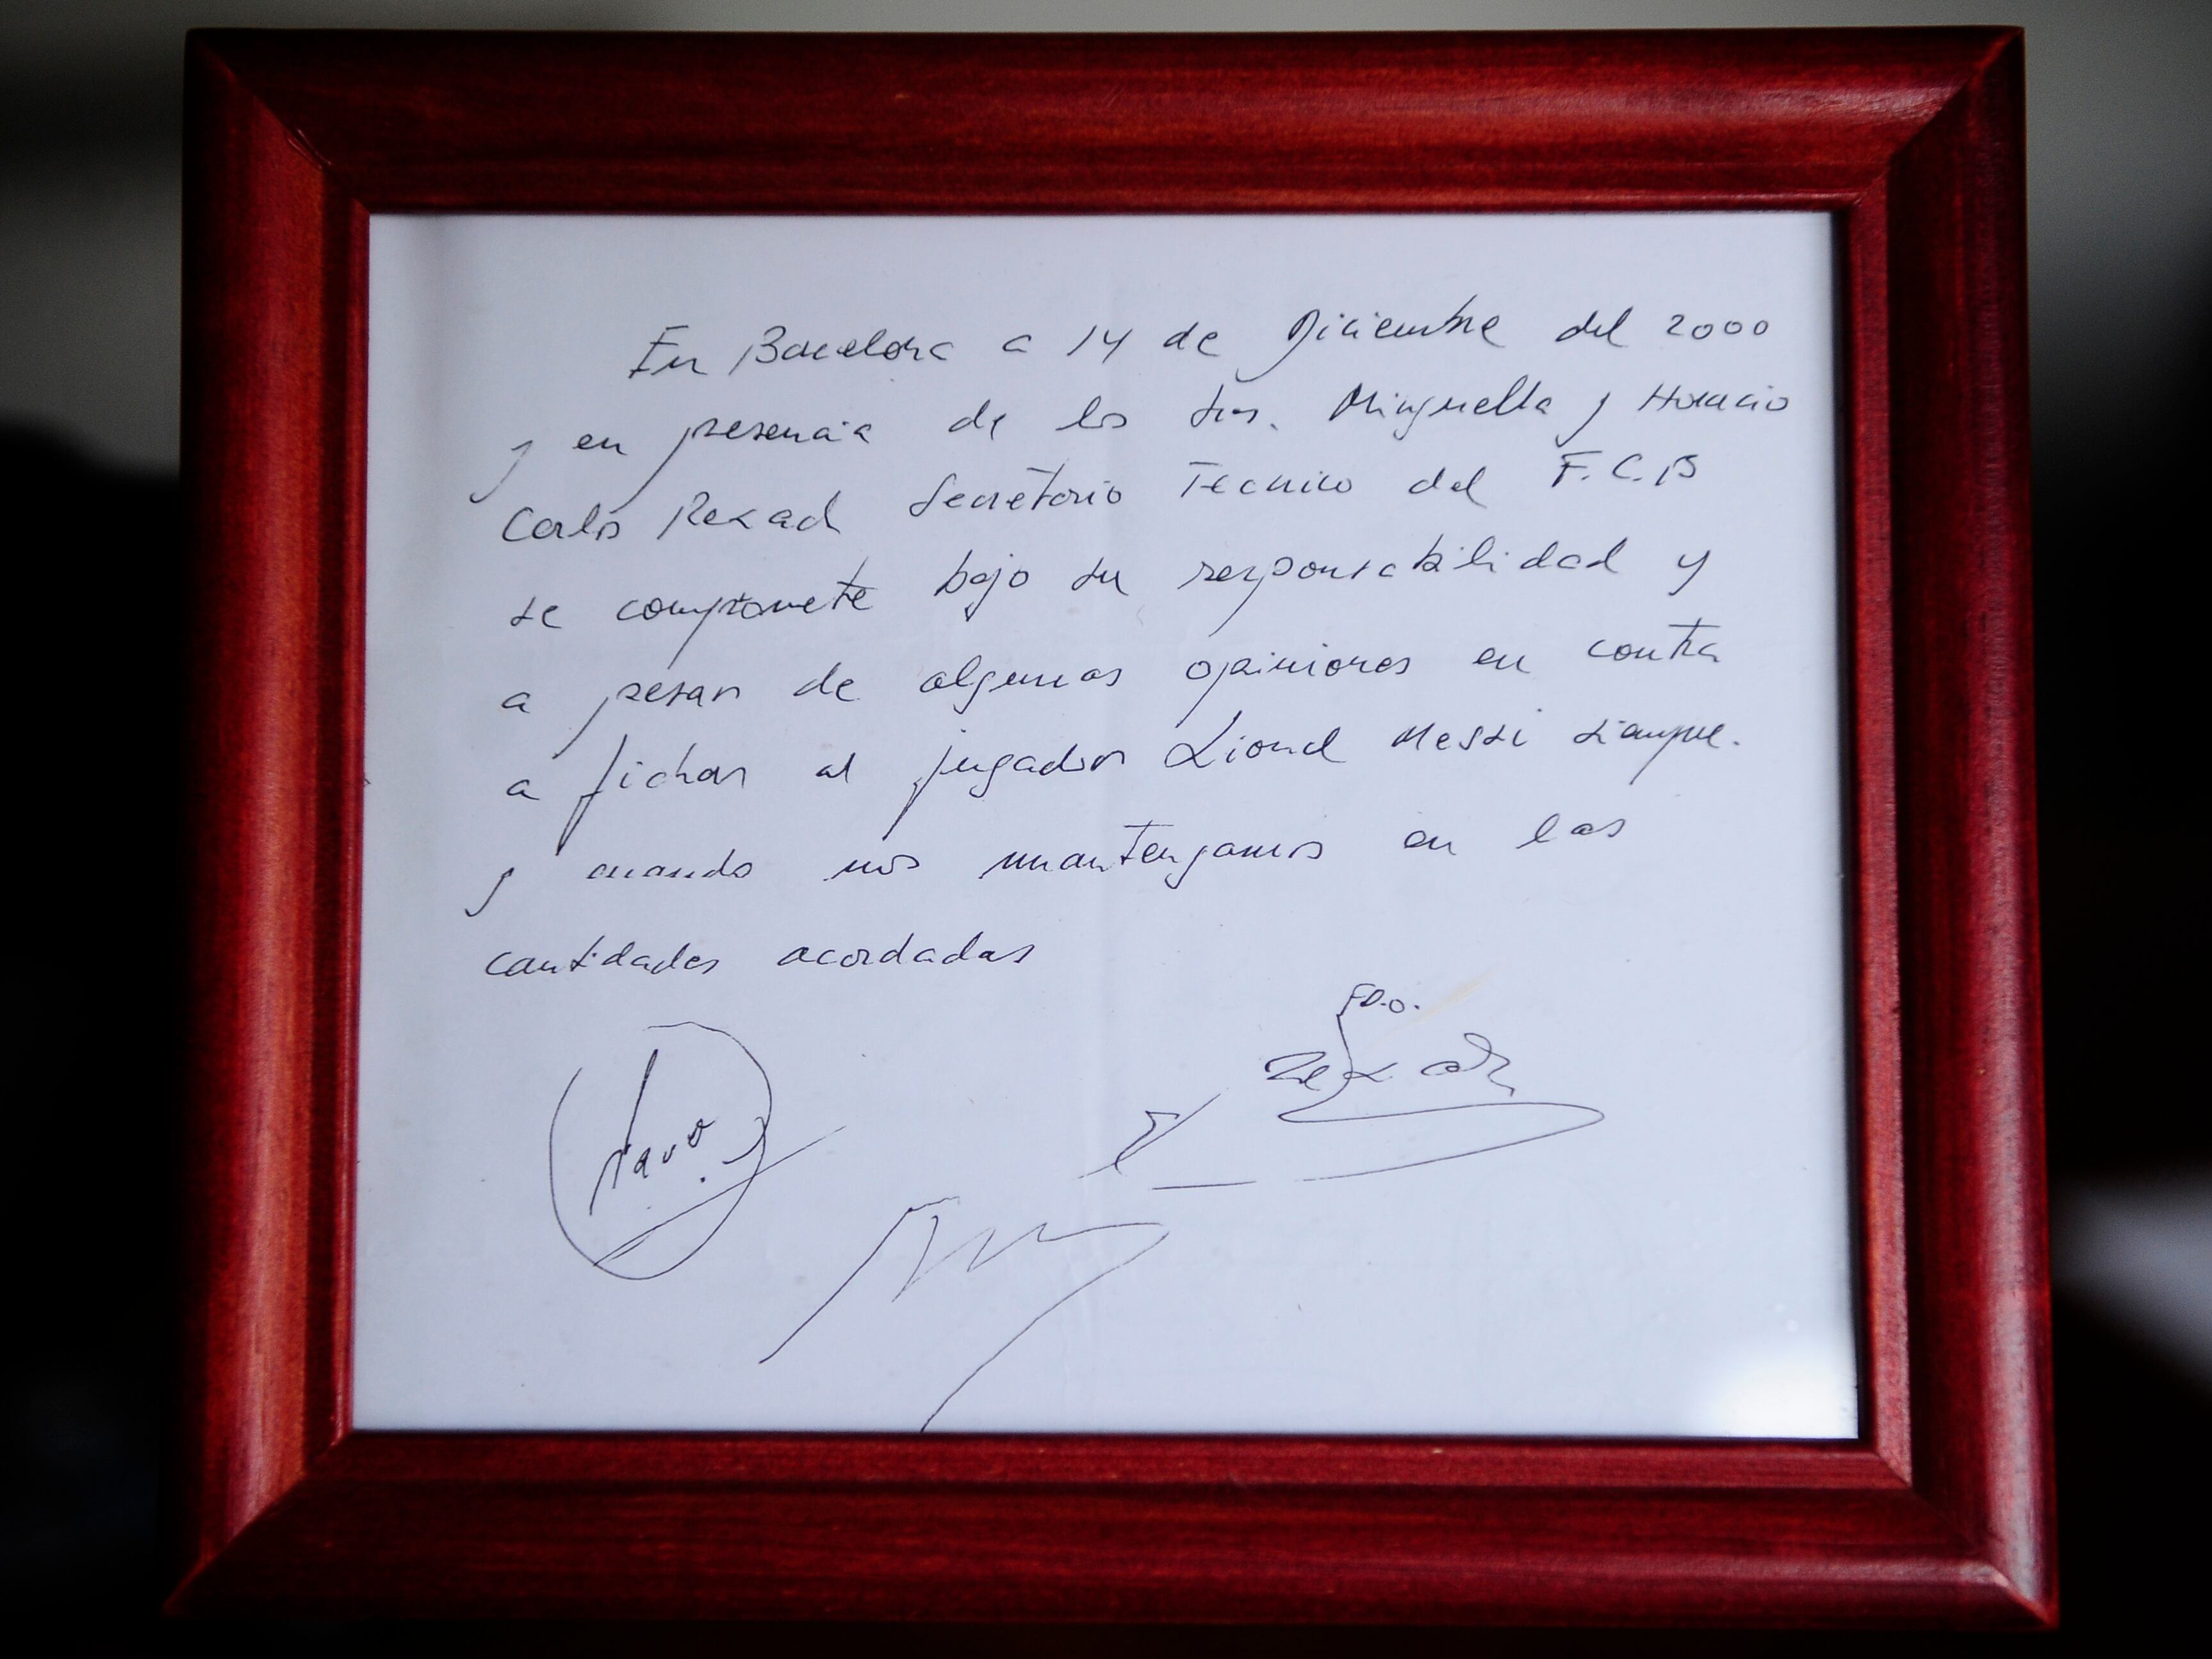 The famous napkin showing the agreement to sign then 13-year-old soccer star Lionel Messi to FC Barcelona was sold at auction on Friday for the equivalent of about $968,600.